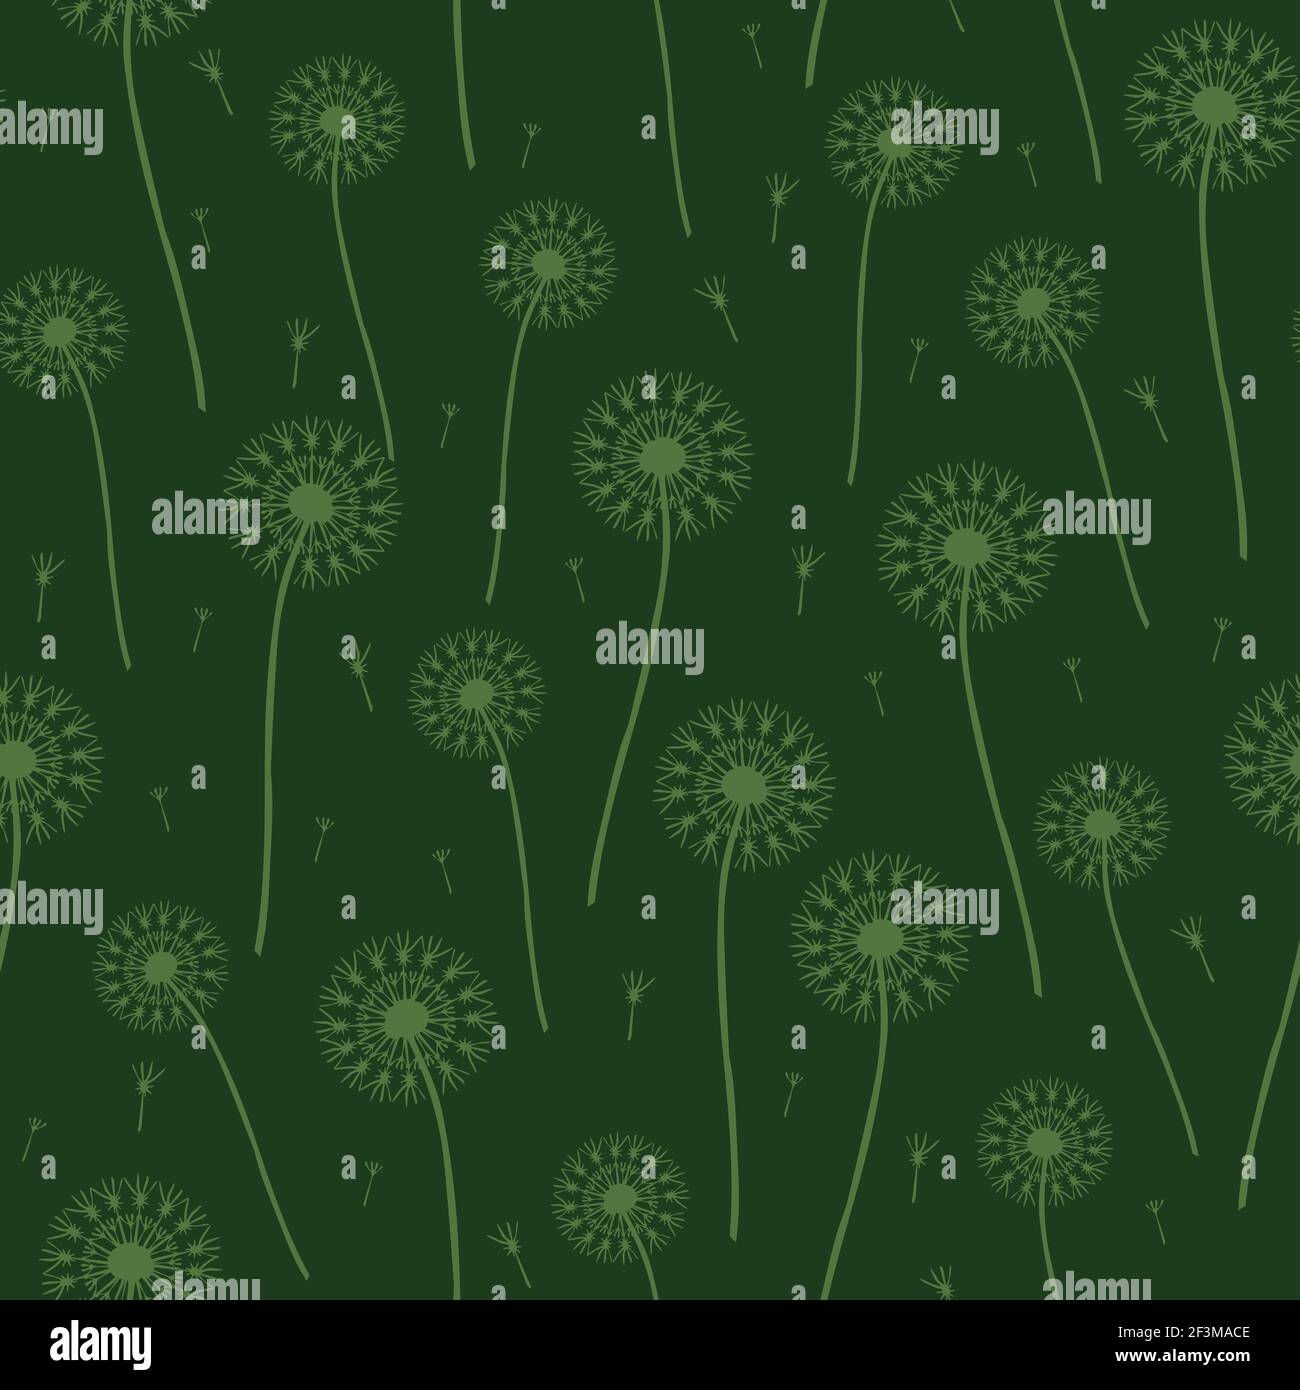 Seamless  vector pattern with dandelions on green background. Make a wish wallpaper design. Decorative floral fashion textile. Stock Vector